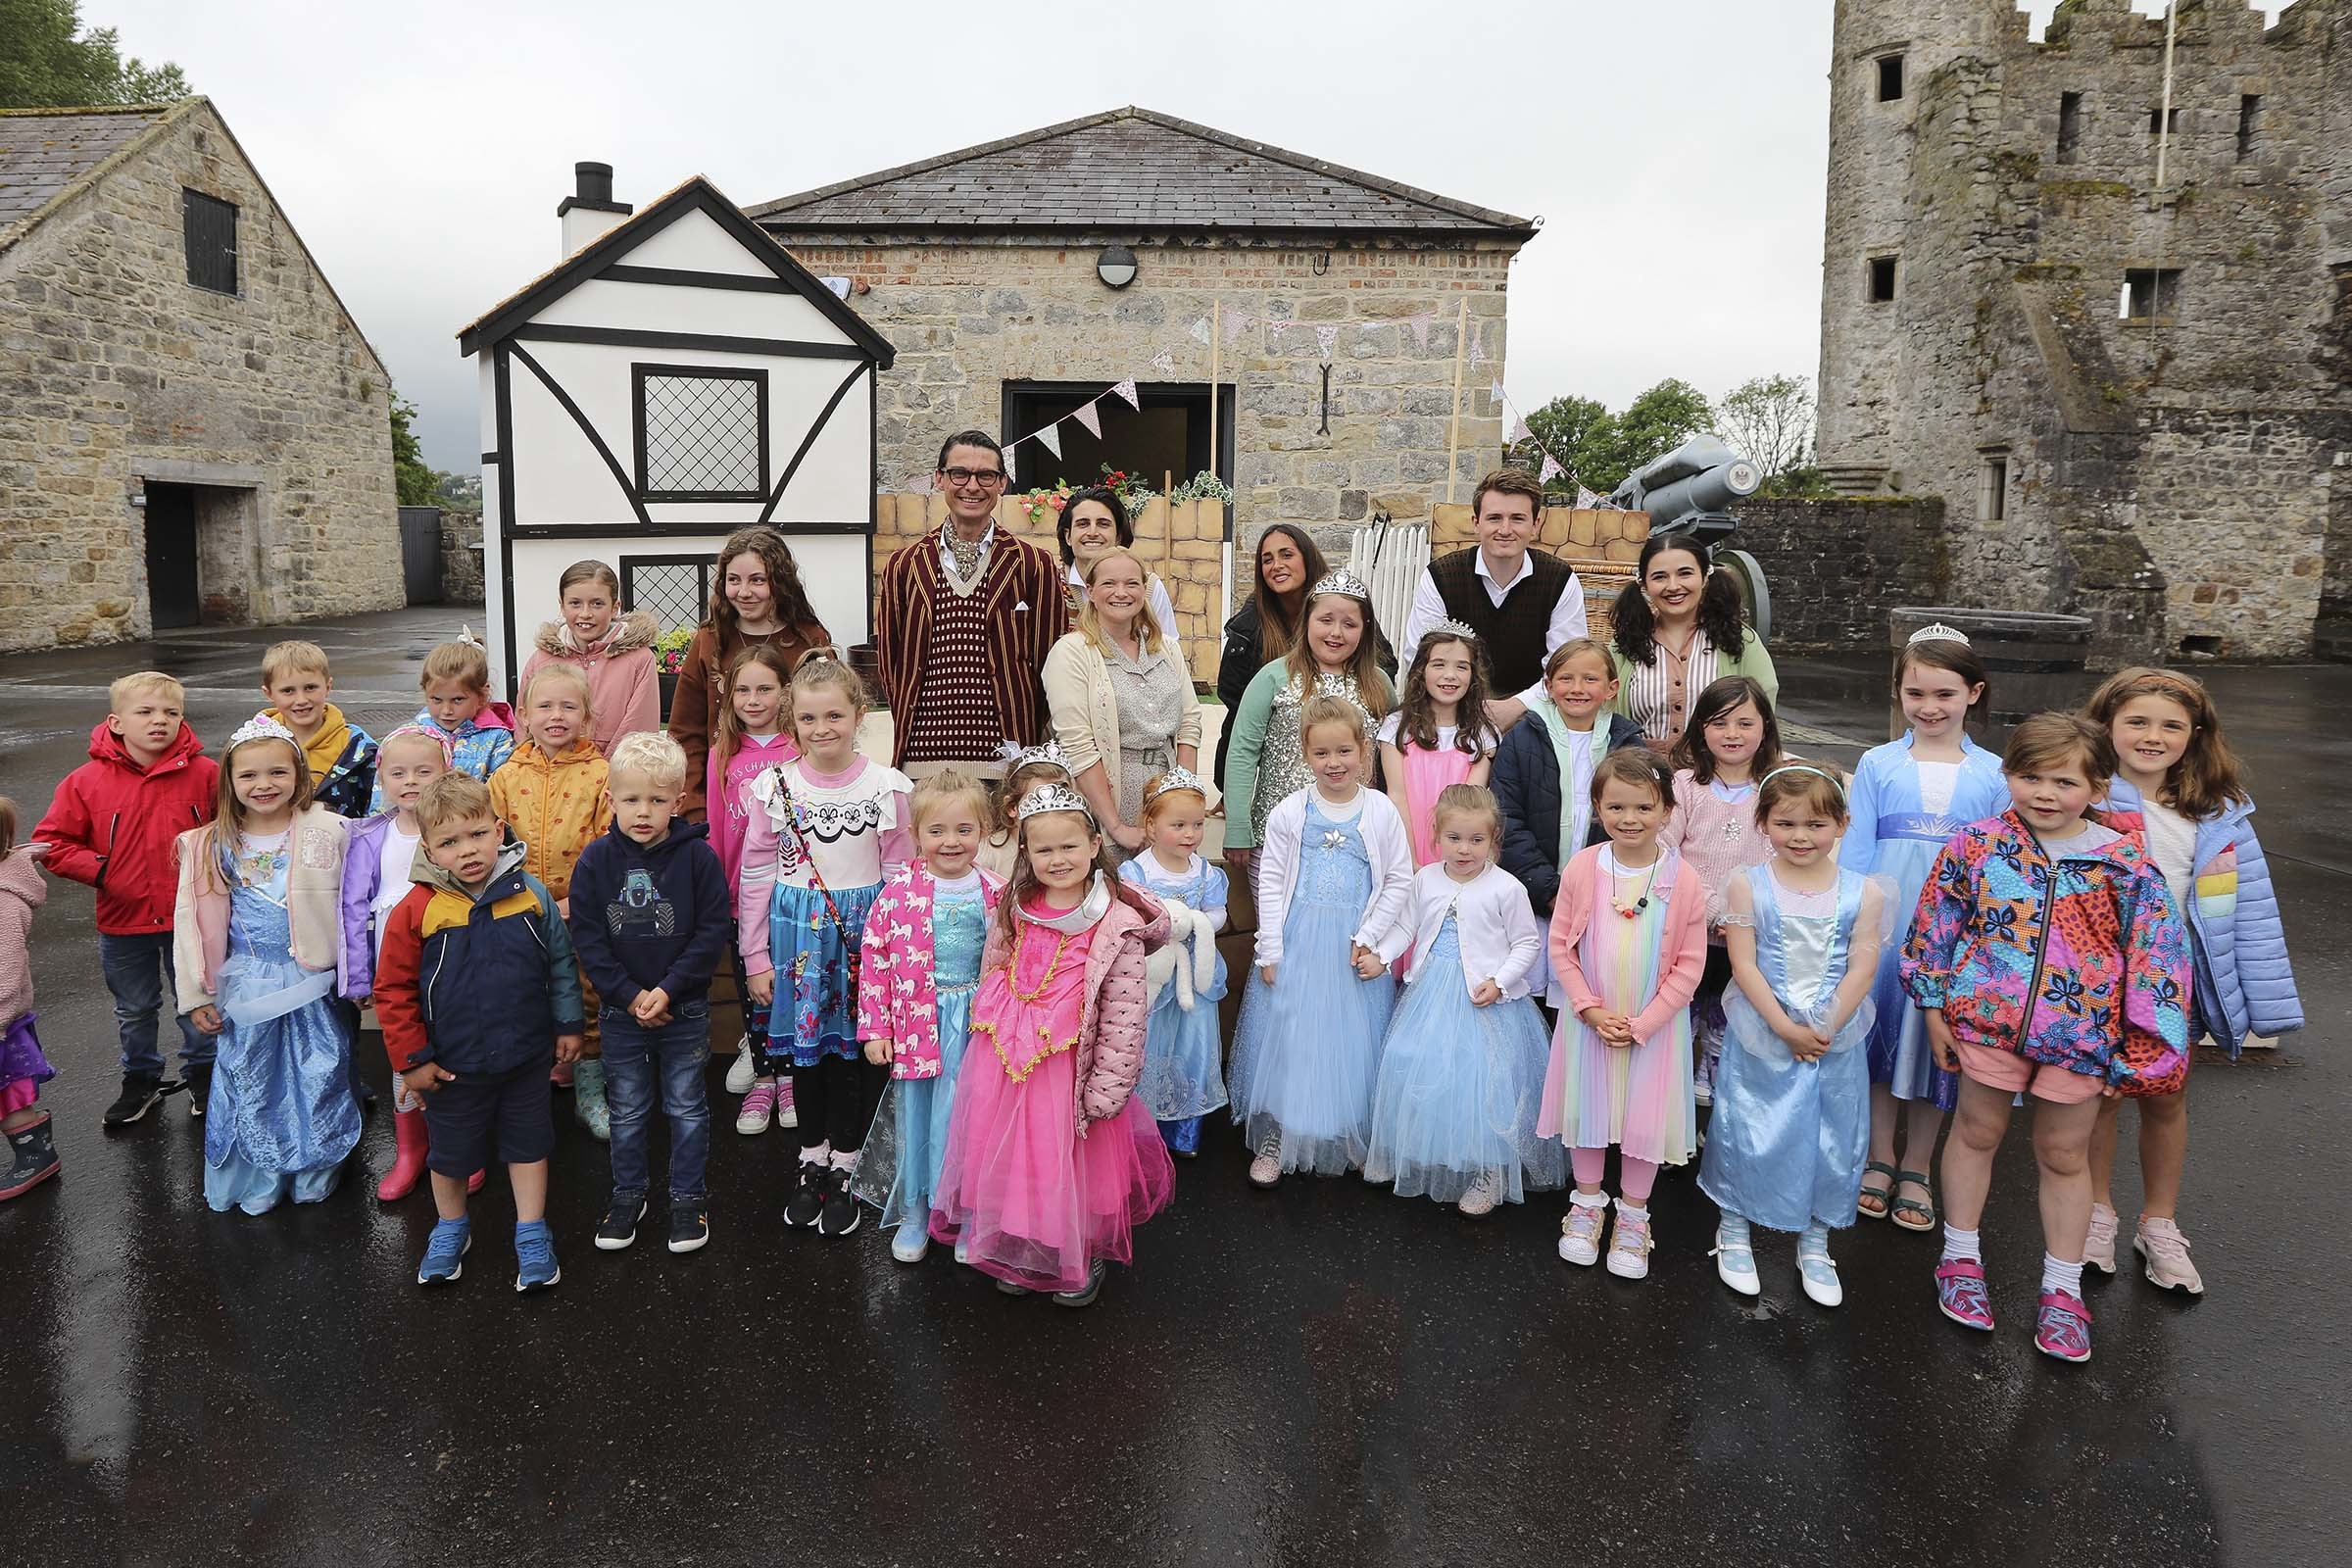 Fermanagh and Omagh: Council’s open air theatre experience a success